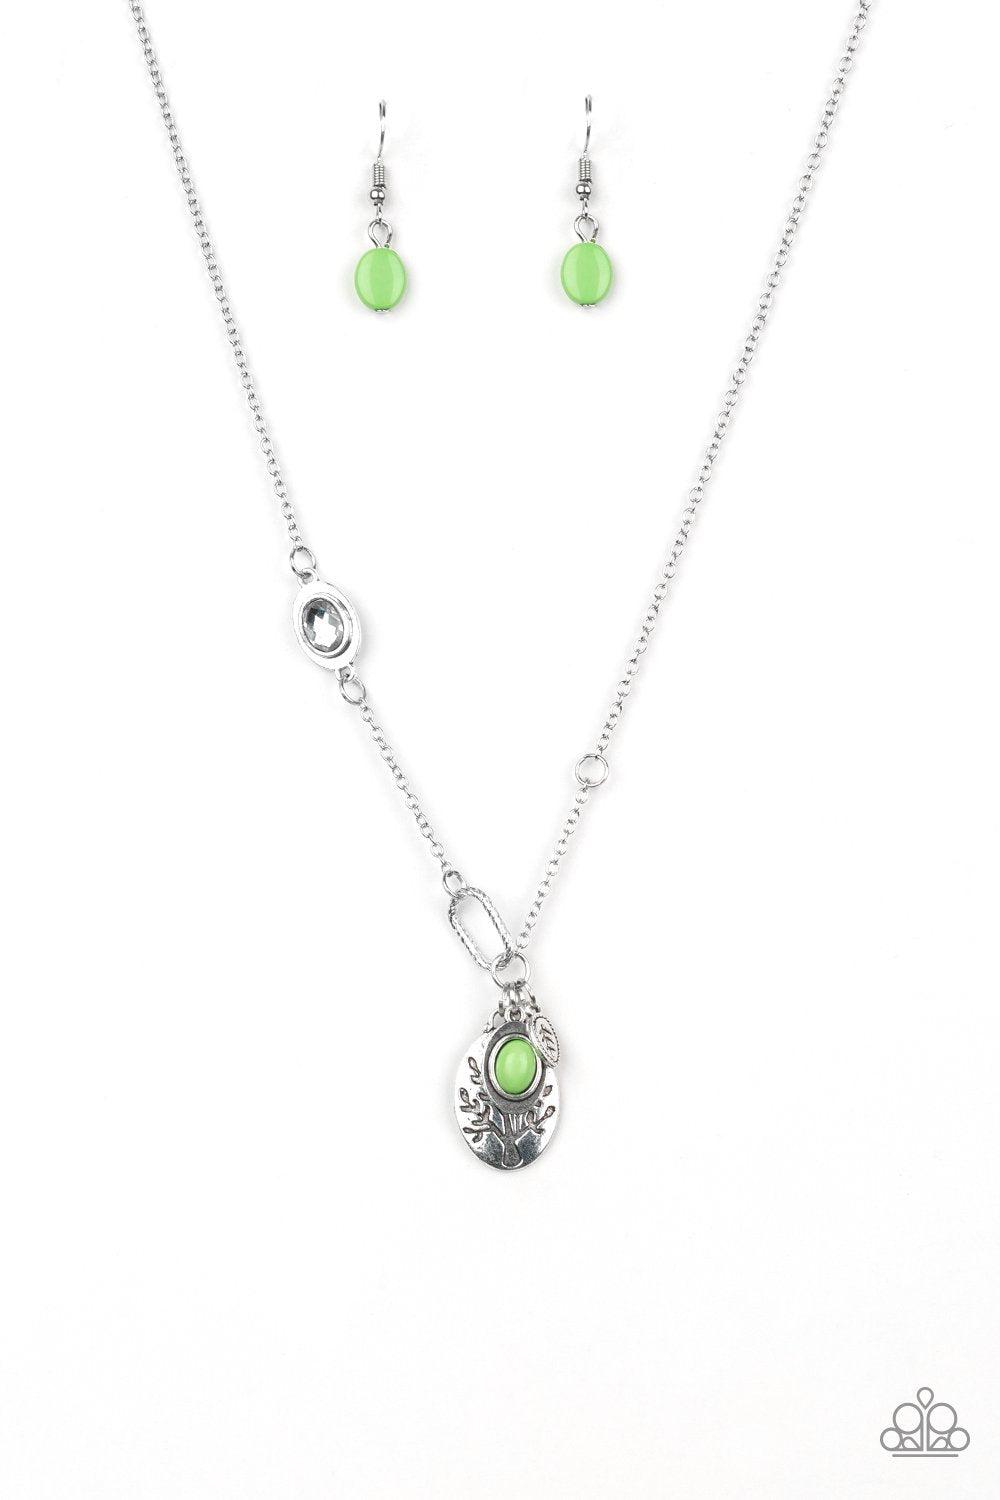 Wanderlust Way Green and Silver Necklace and matching Earrings - Paparazzi Accessories-CarasShop.com - $5 Jewelry by Cara Jewels